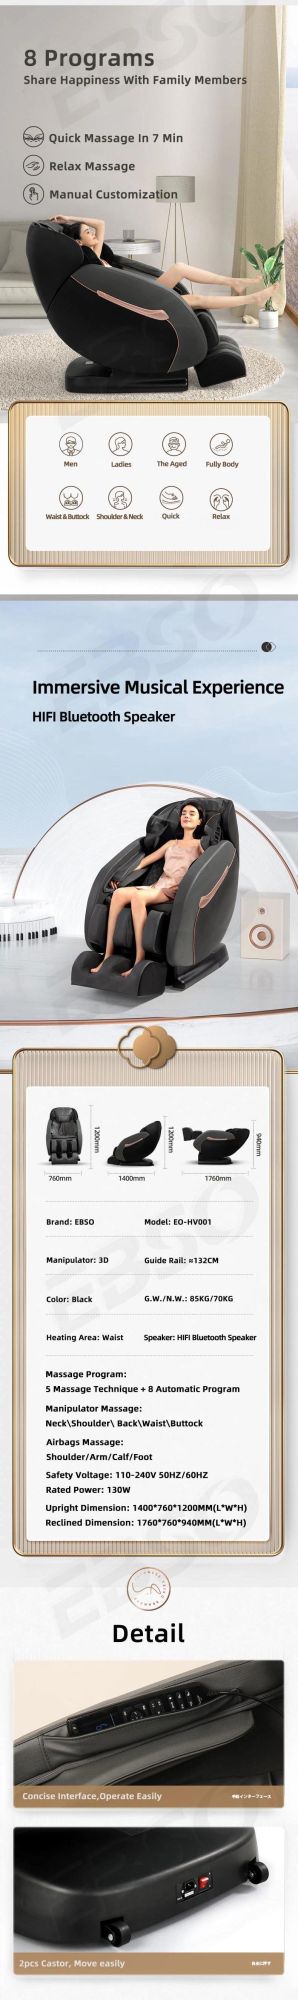 Hot Sales High Quality Home Office Furniture Massage Chair Cheaper Price Luxury Zero Gravity Recliner Massage Chair